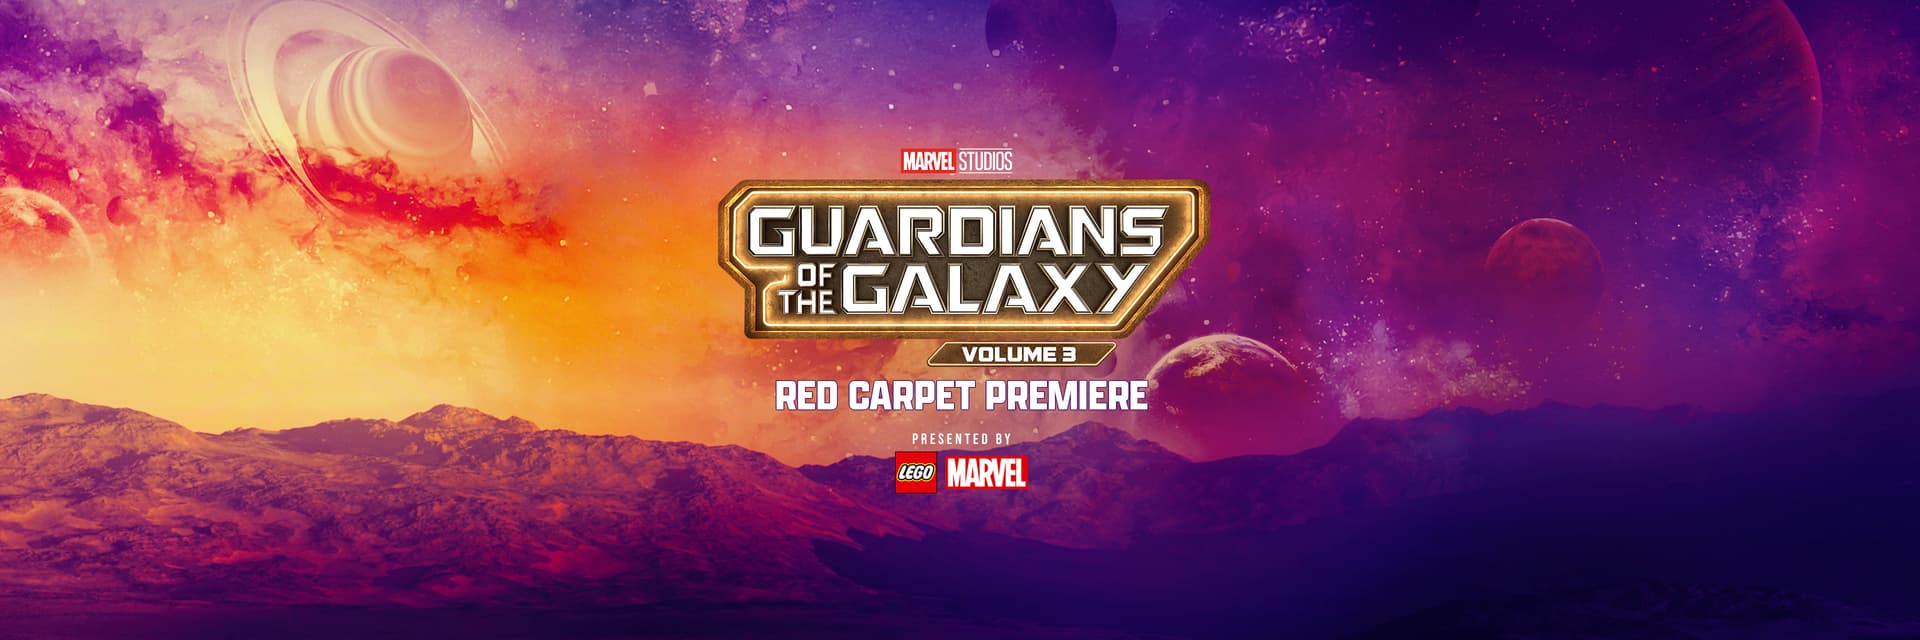 Guardians of the Galaxy Vol. 3 Live Red Carpet Premiere